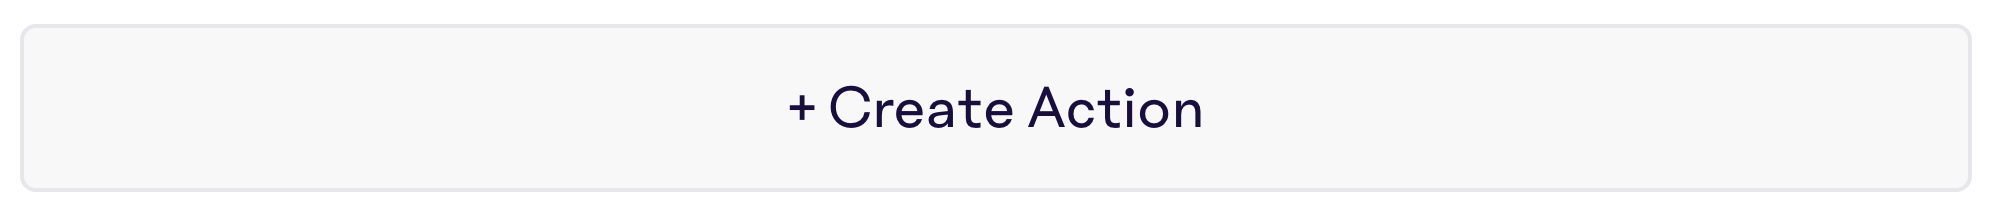 Create-Action-Button.png